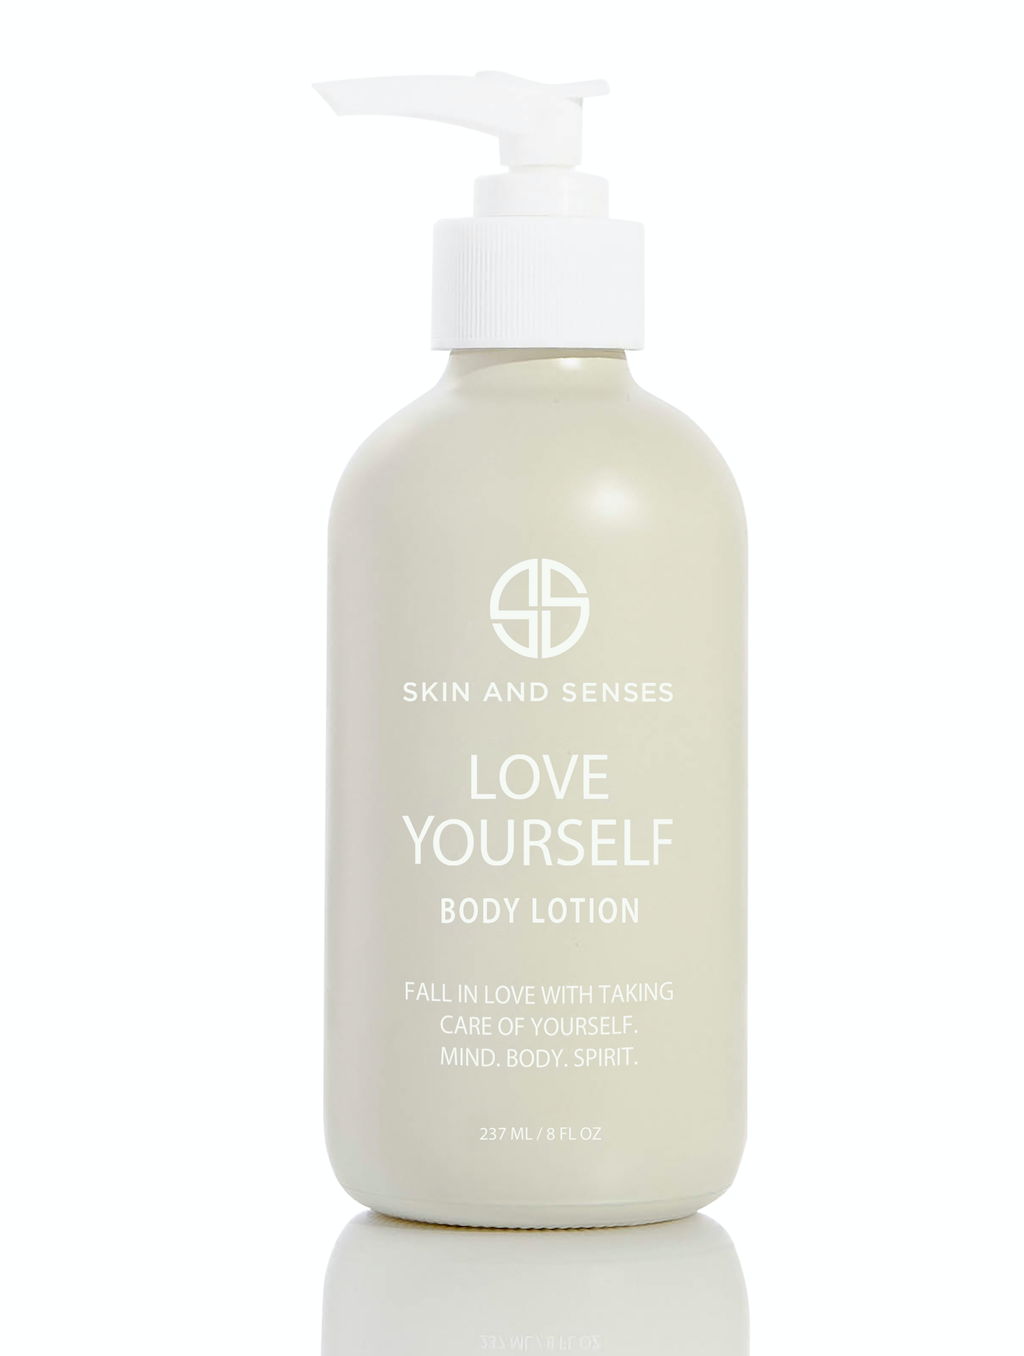 Love Yourself Body Lotion